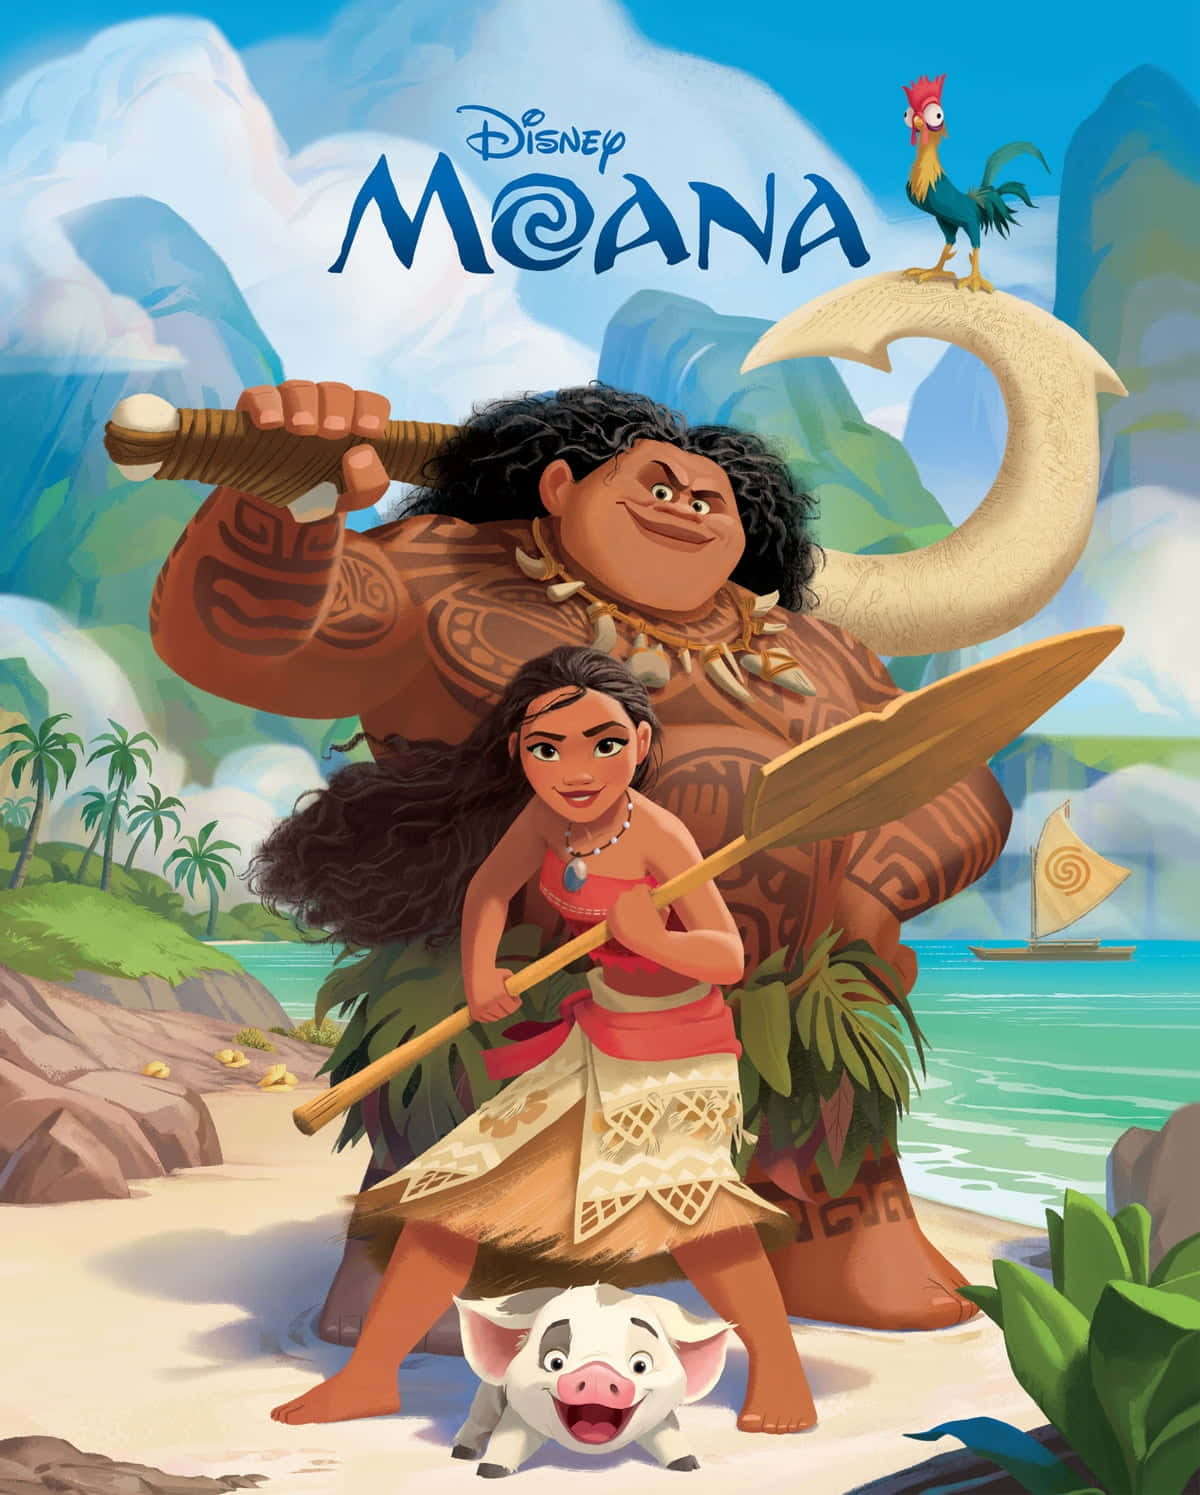 Get inspired by the strong and fearless Moana!